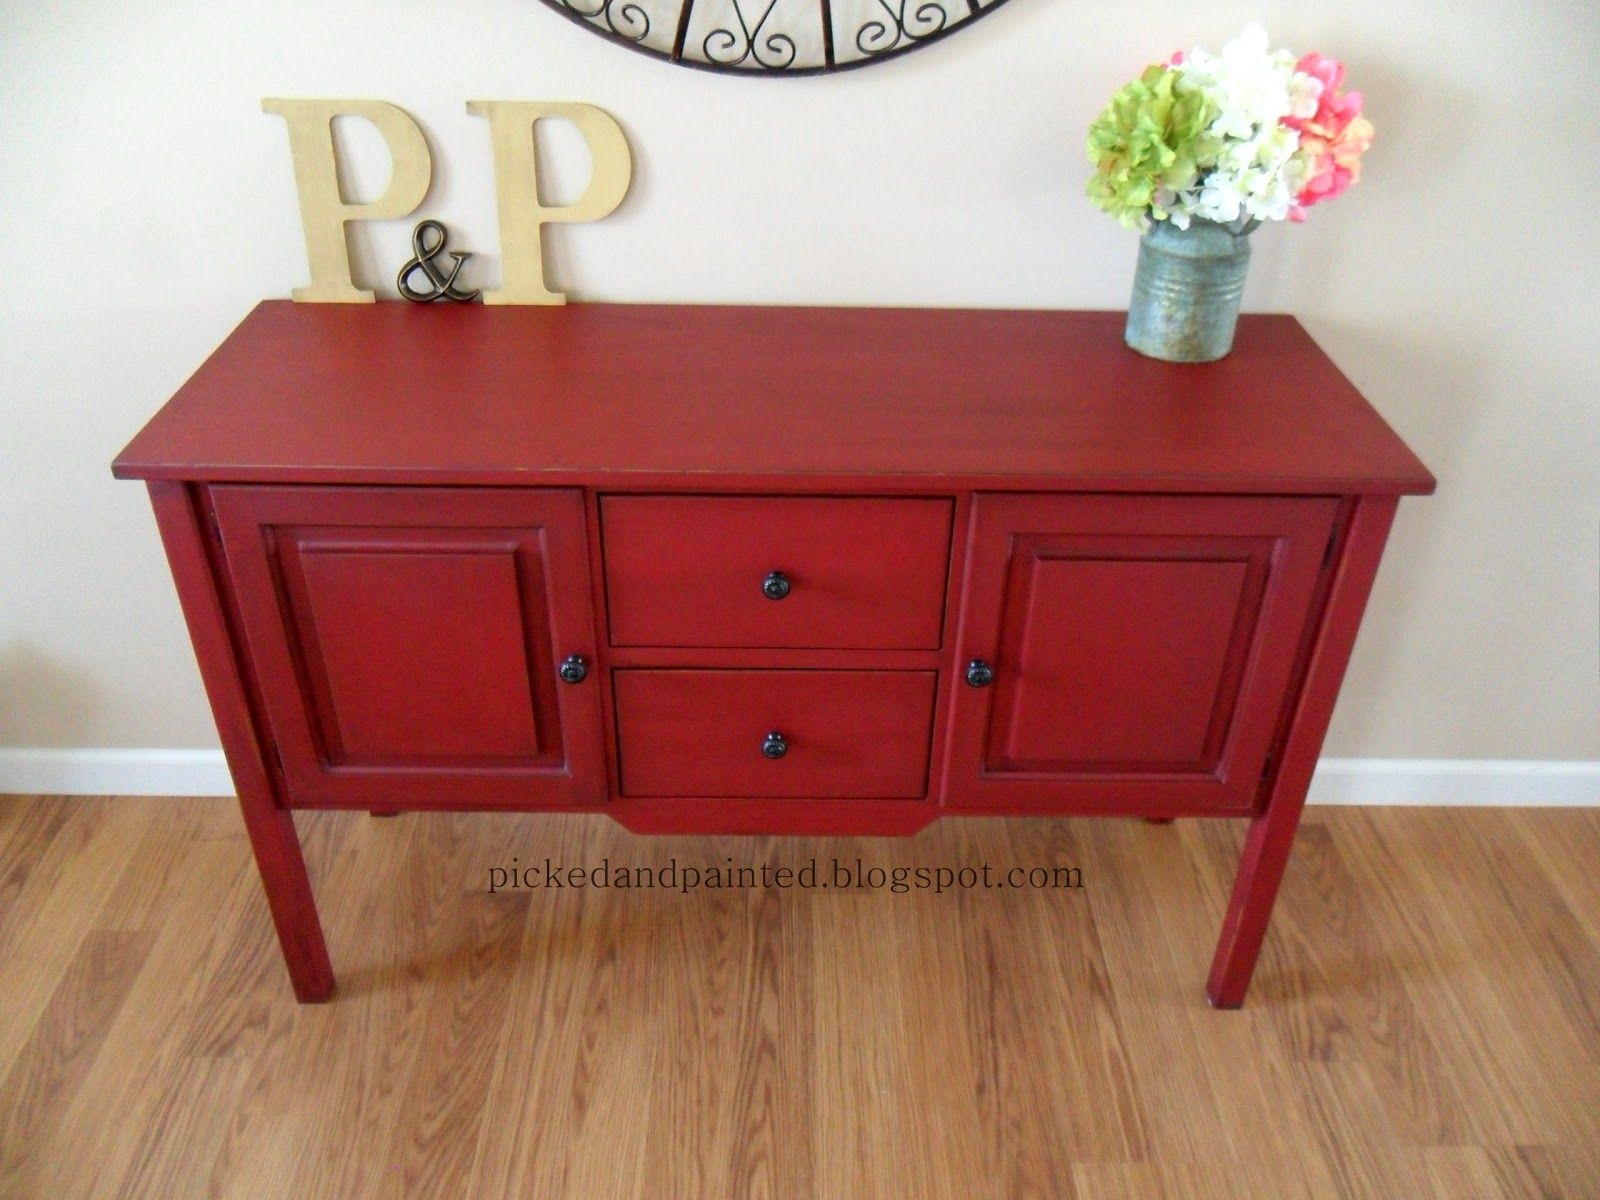 Red buffet table